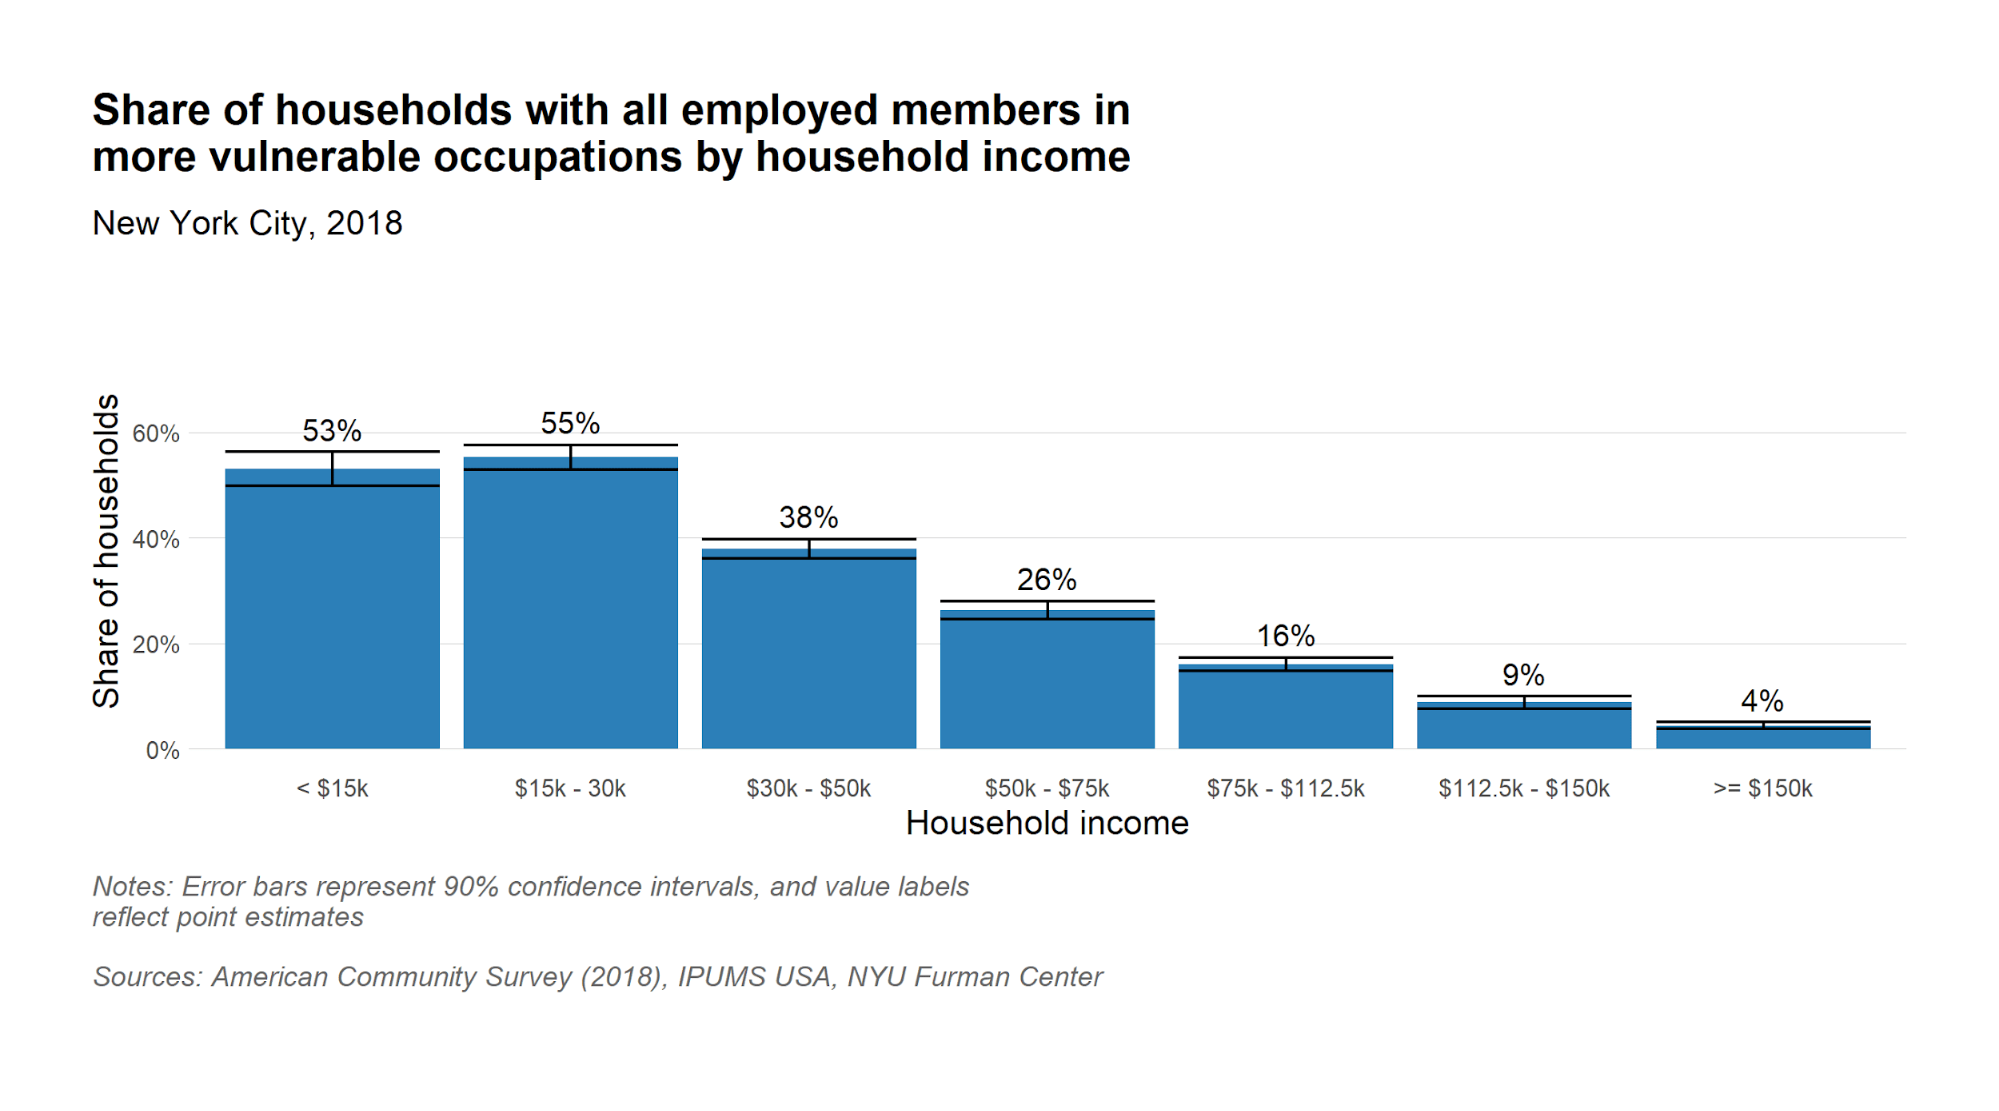 Share of households with all employed members in vulnerable occupation by household income